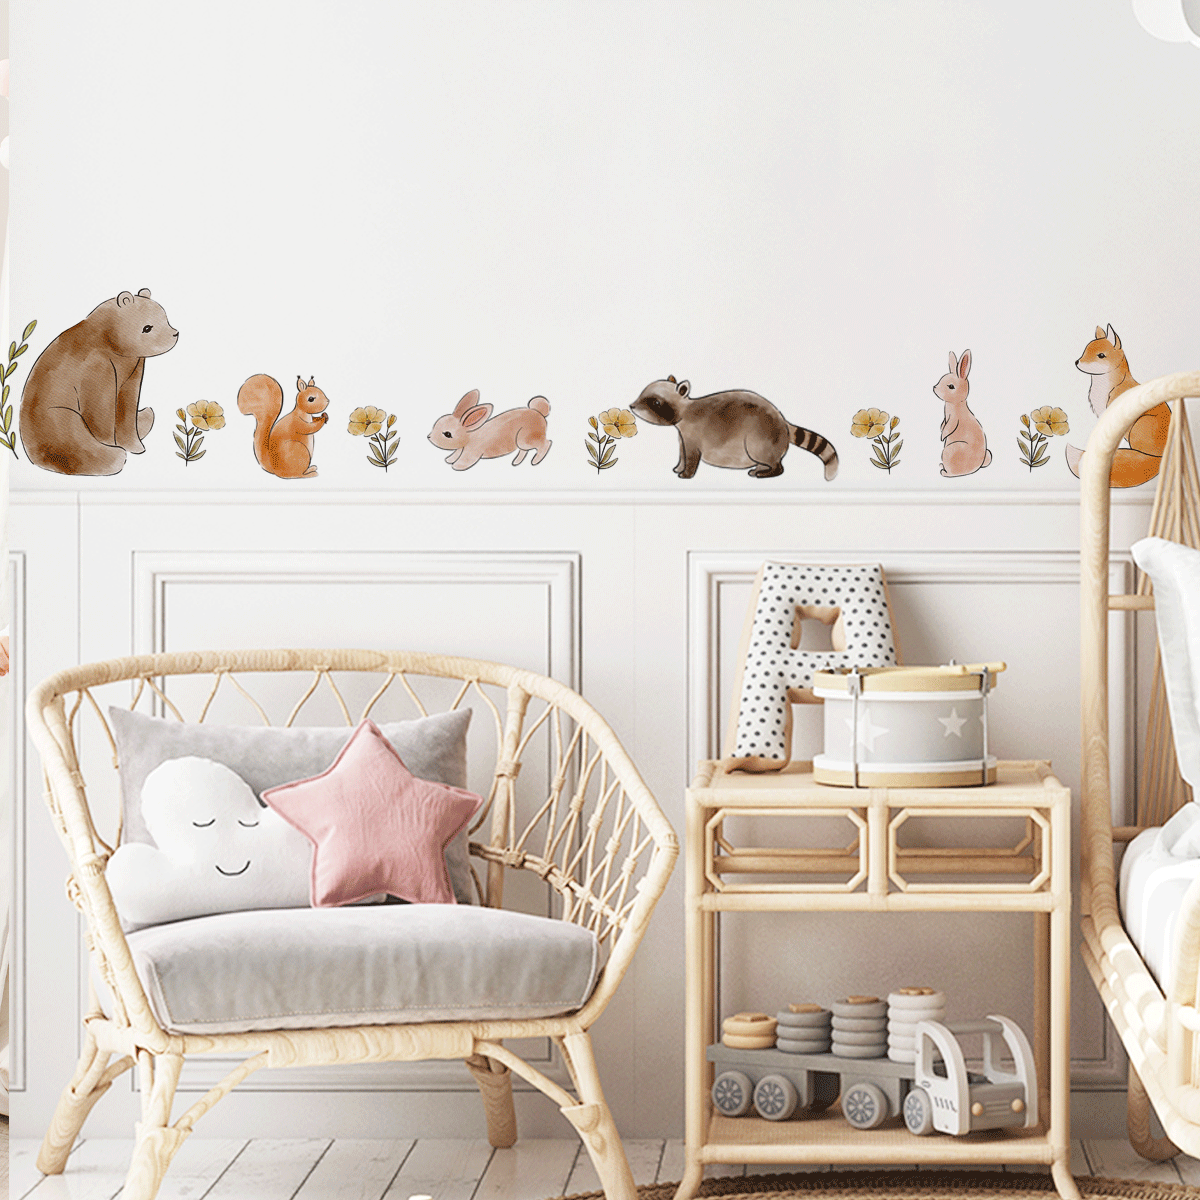 Woodland wall stickers - Hand-drawn forest friends